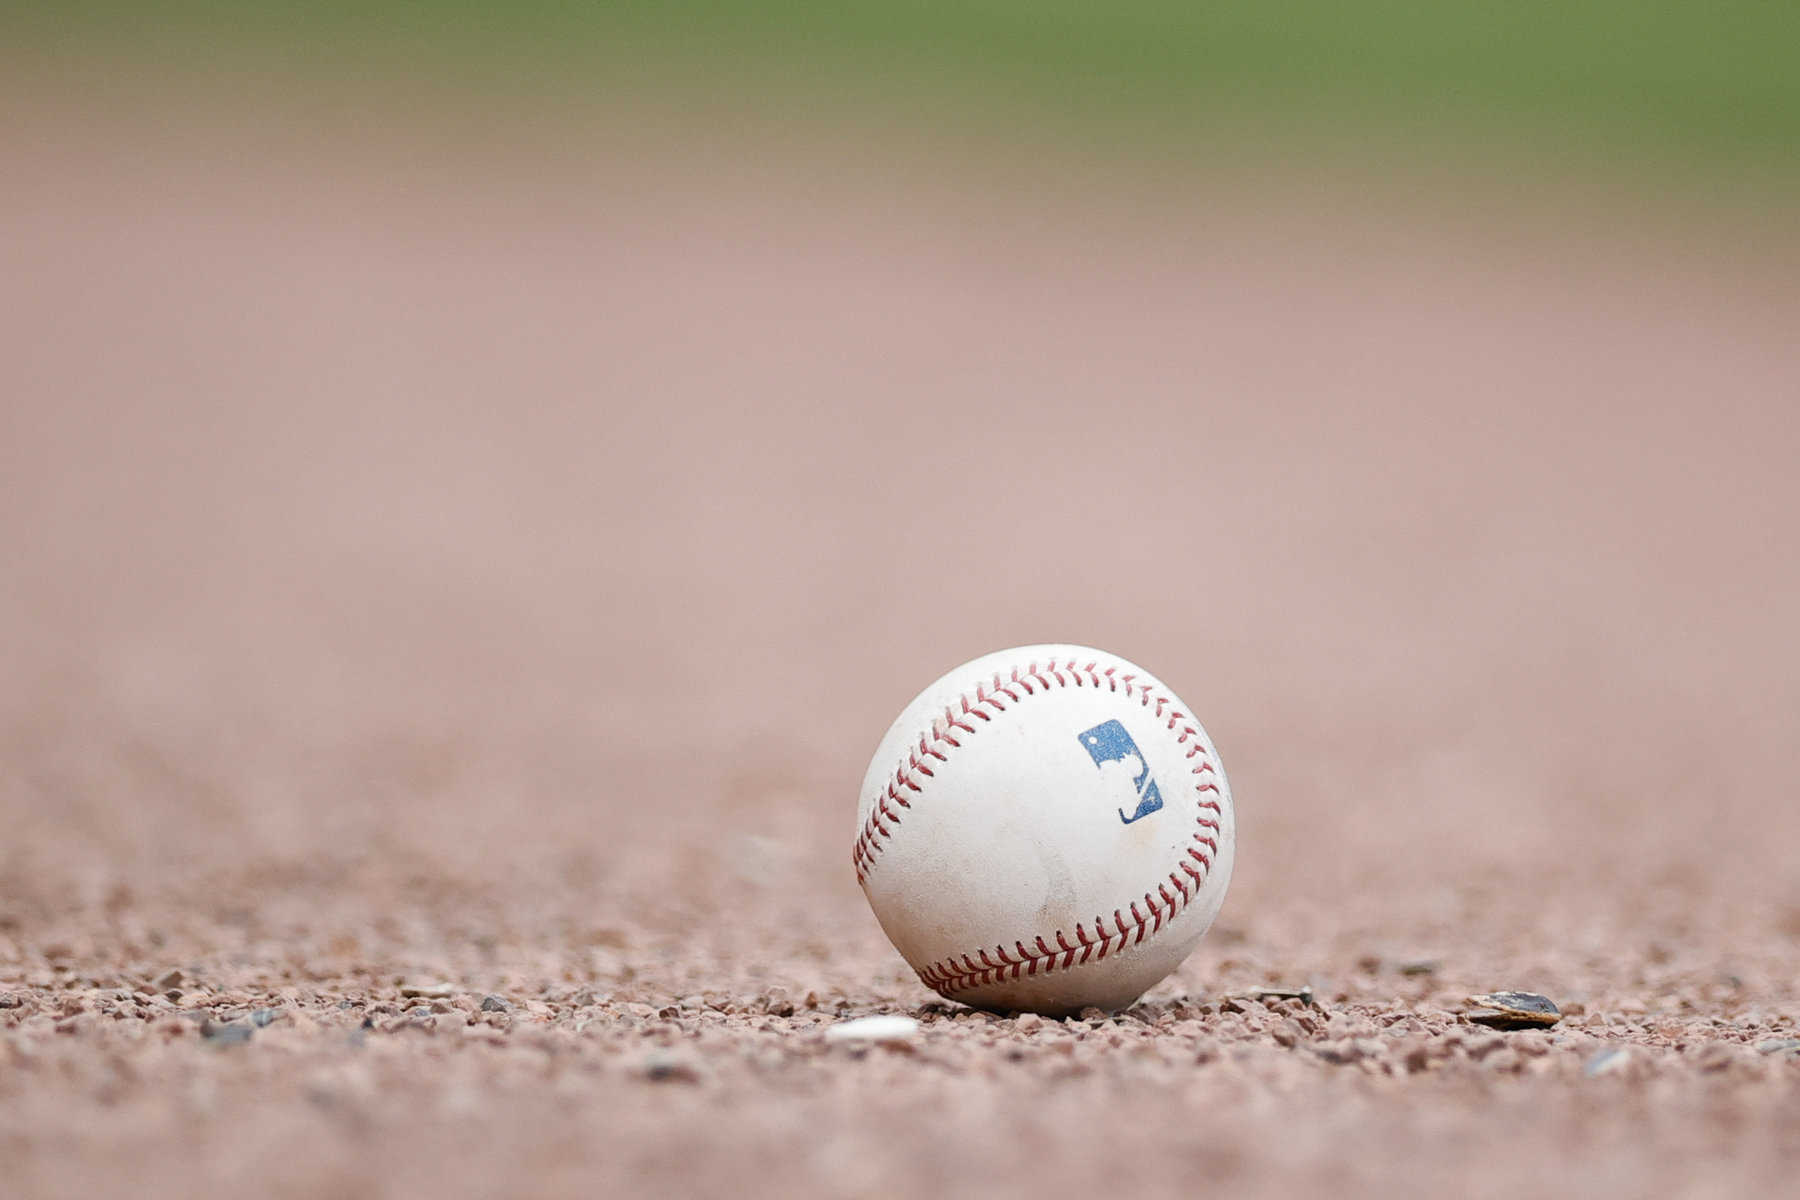 MLB DFS Punt Plays For DraftKings and FanDuel (March 29)